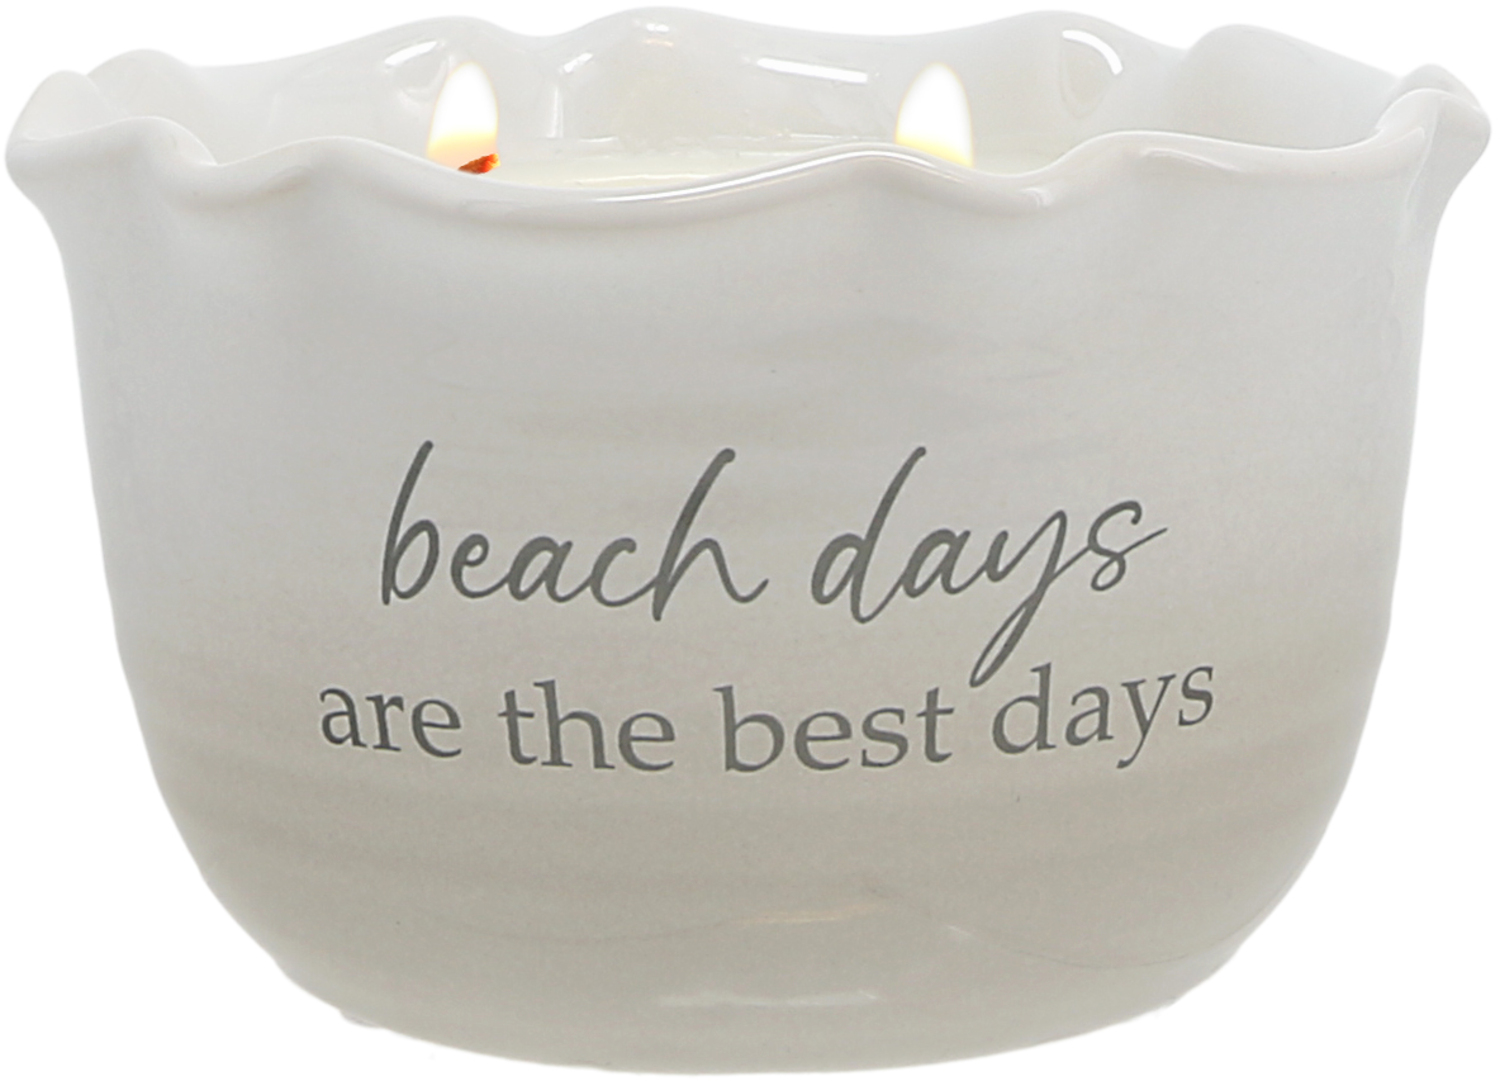 Beach Days by Thoughts of Home - Beach Days - 11 oz - 100% Soy Wax Reveal Candle
Scent: Tranquility